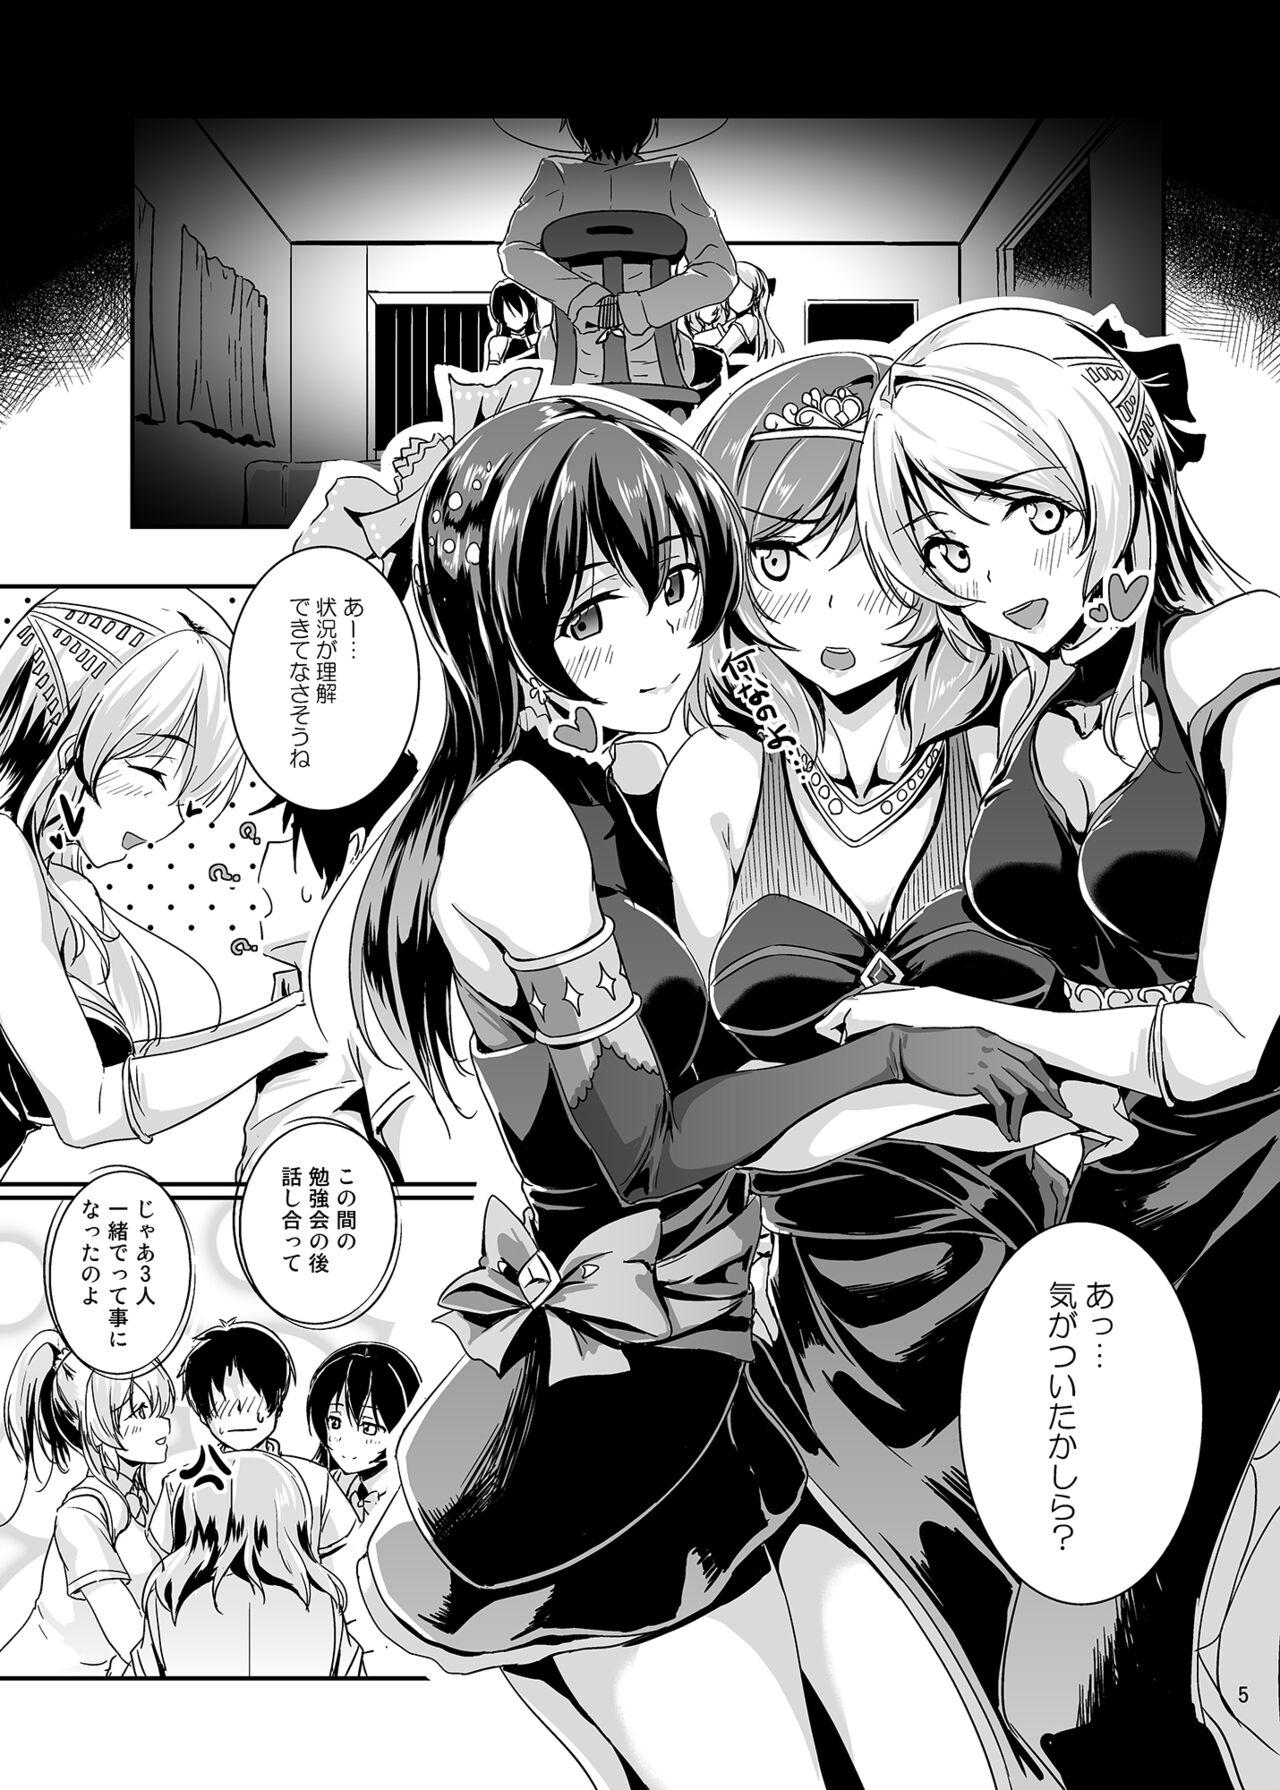 Indo secret in my heart - Love live Jap - Page 5